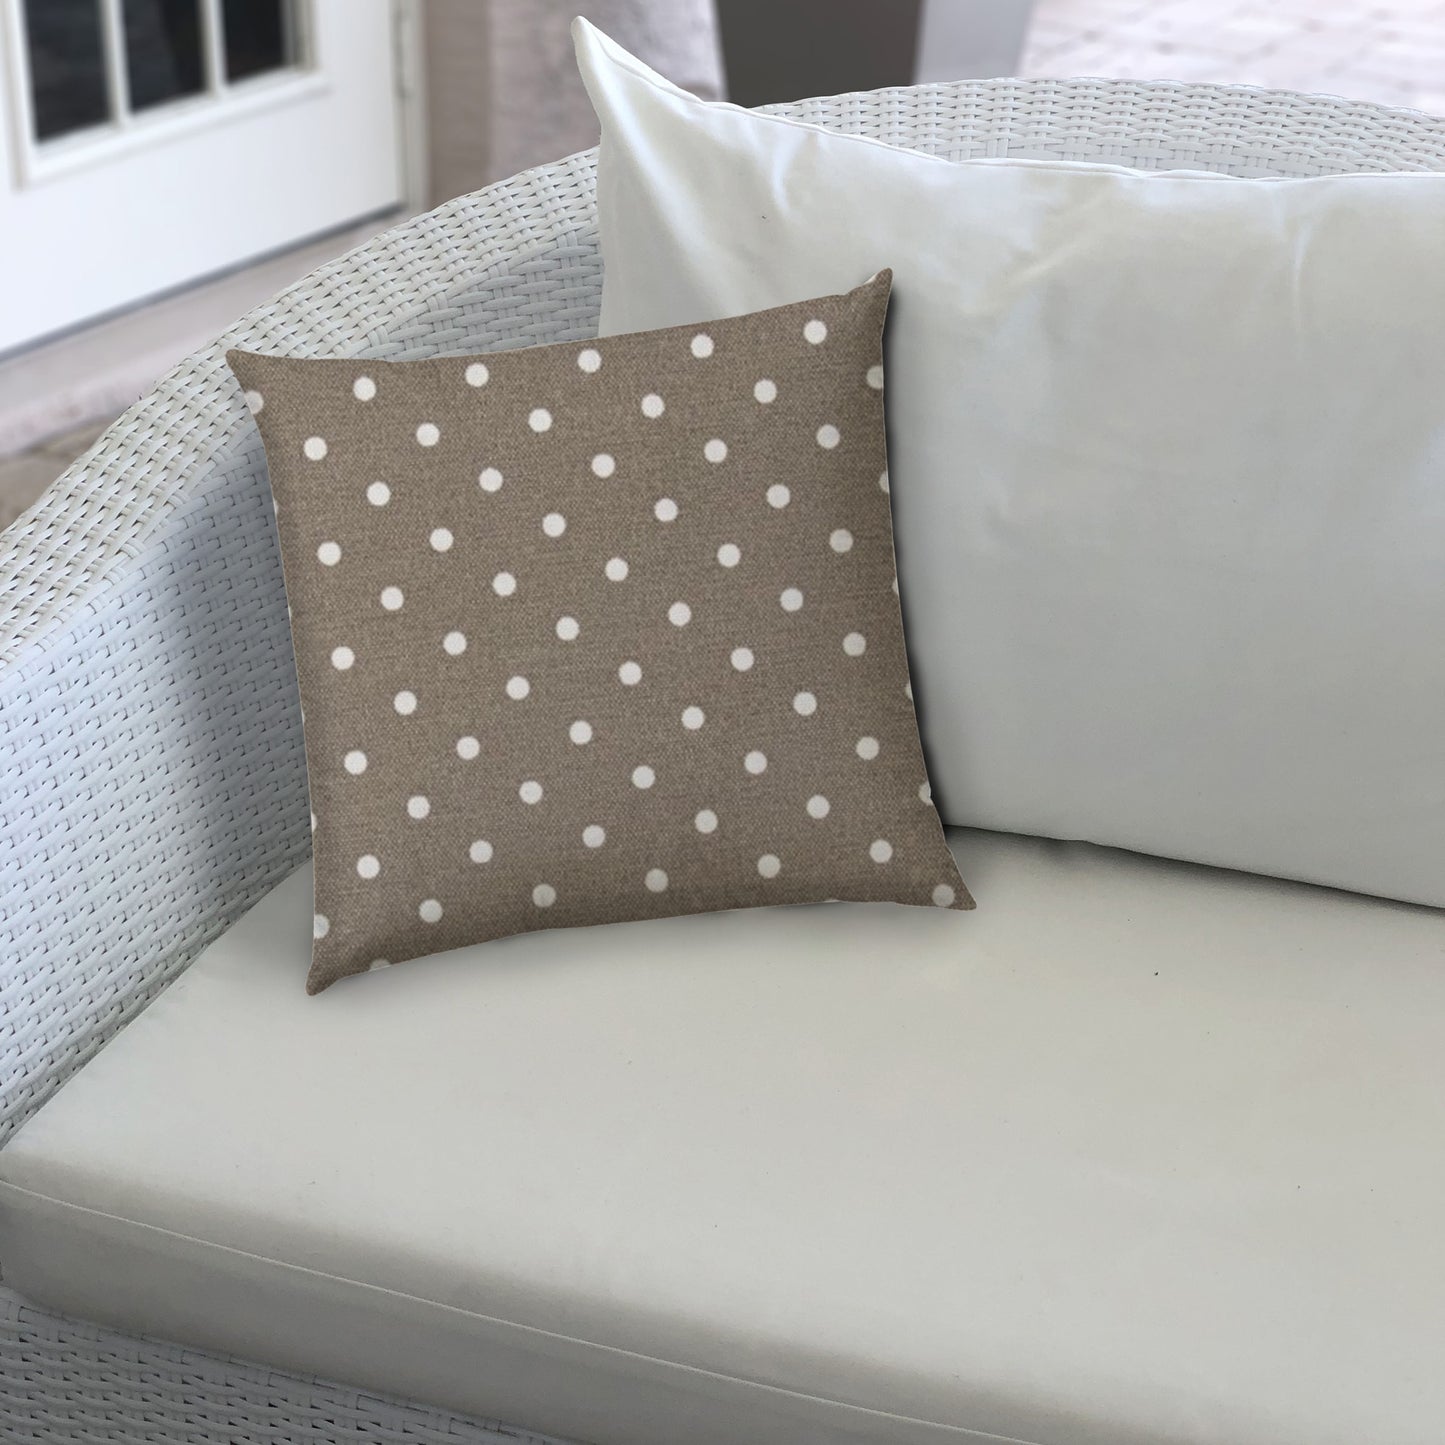 DINER DOT Taupe Indoor/Outdoor Pillow - Sewn Closure